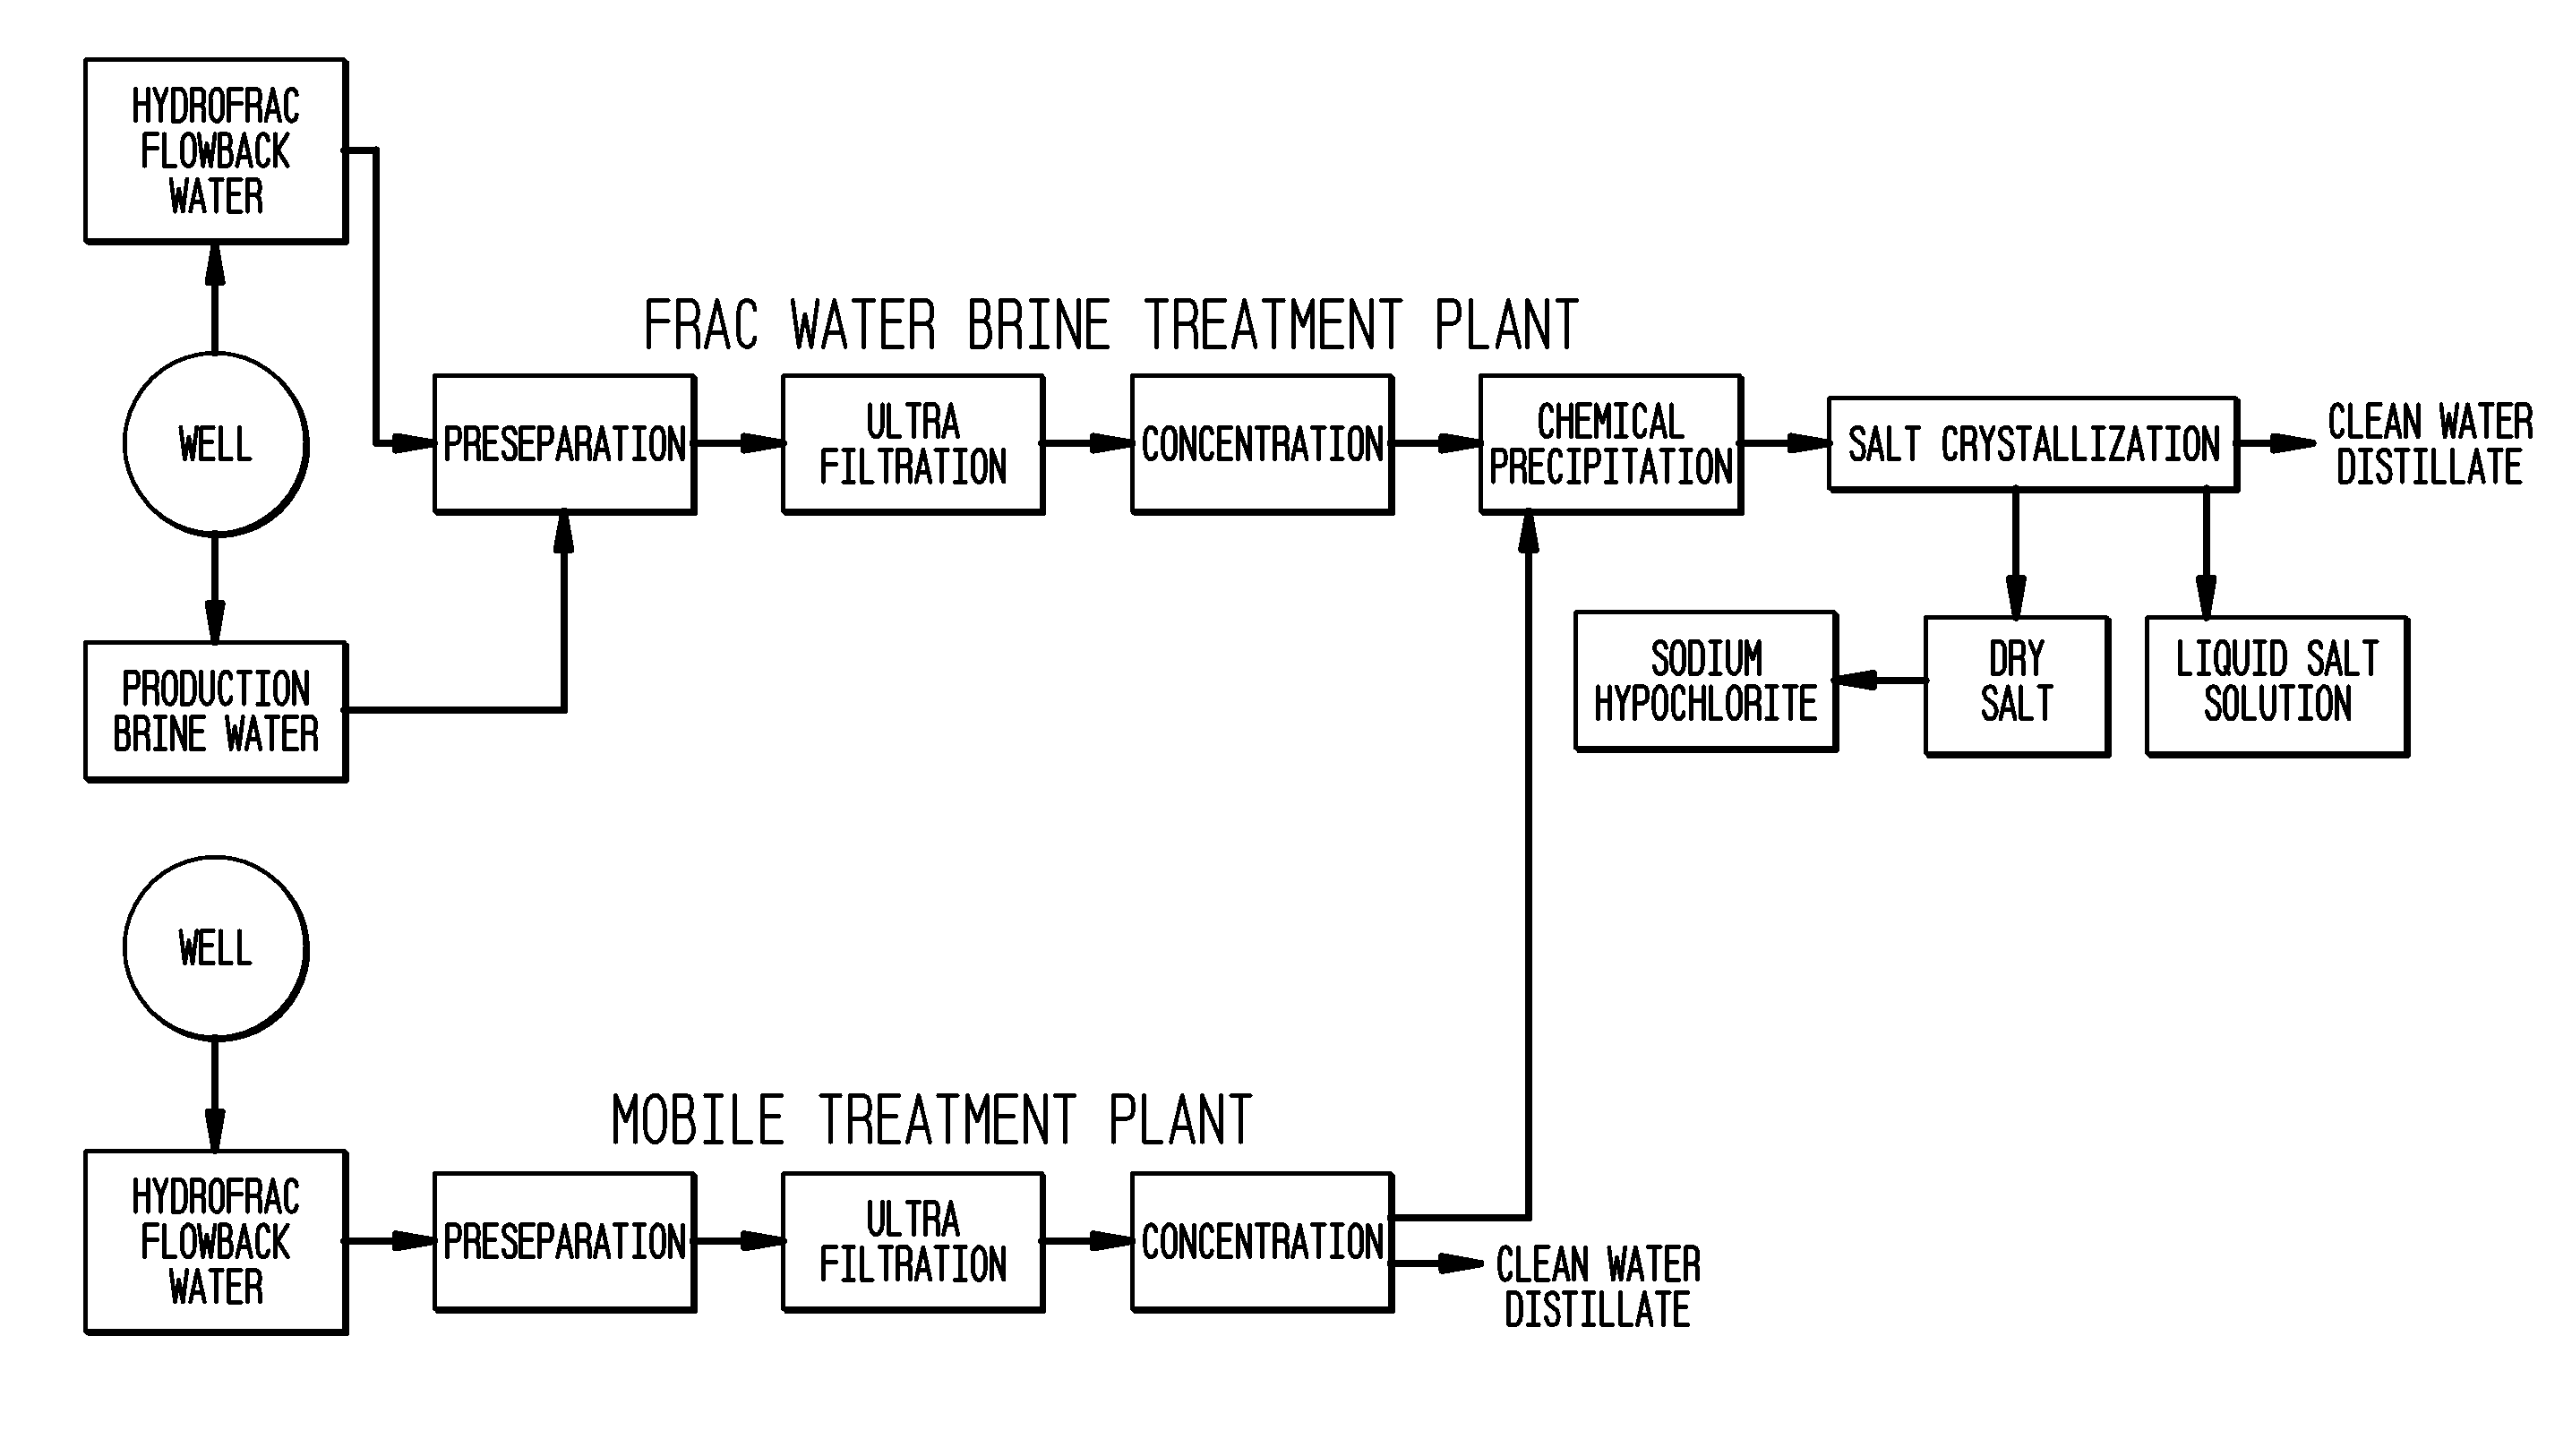 Method of making pure salt from frac-water/wastewater